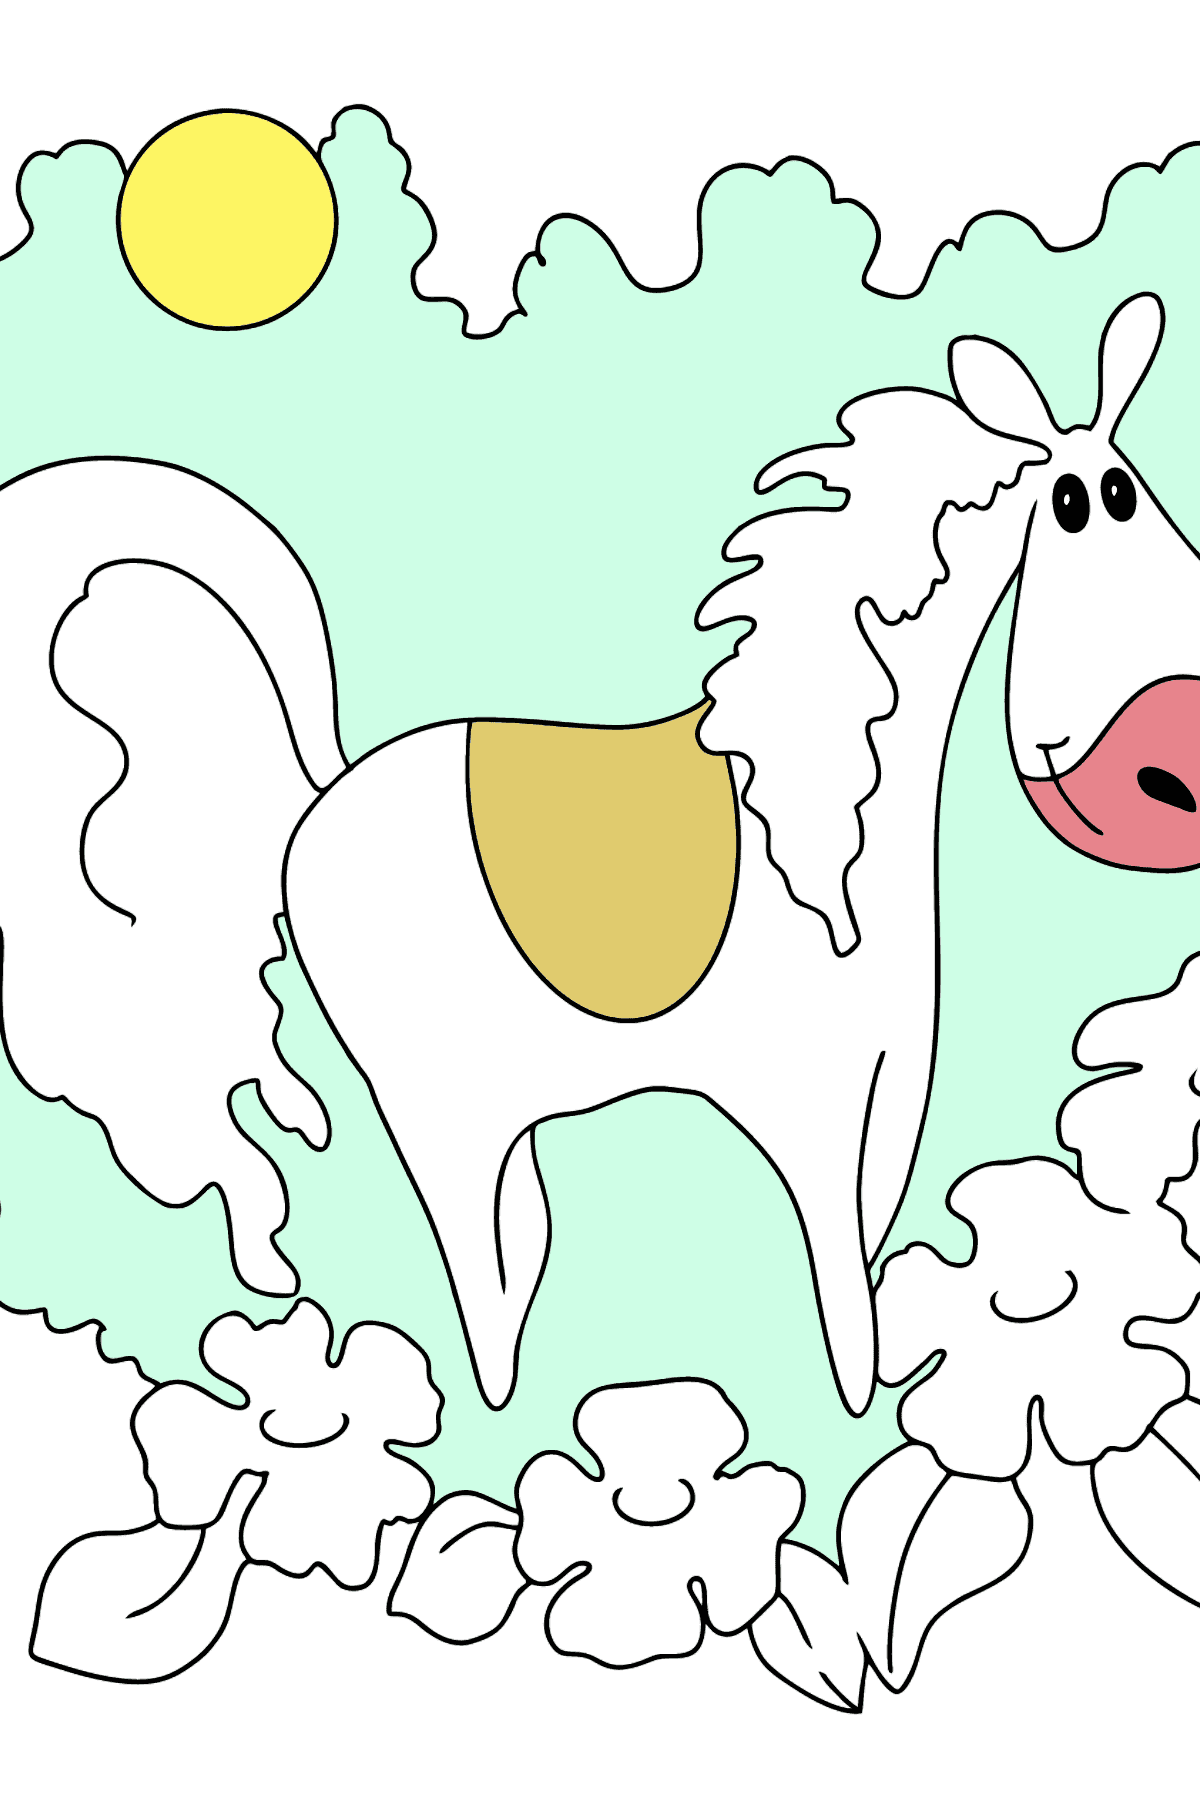 Simple coloring page a horse in flowers - Coloring Pages for Kids